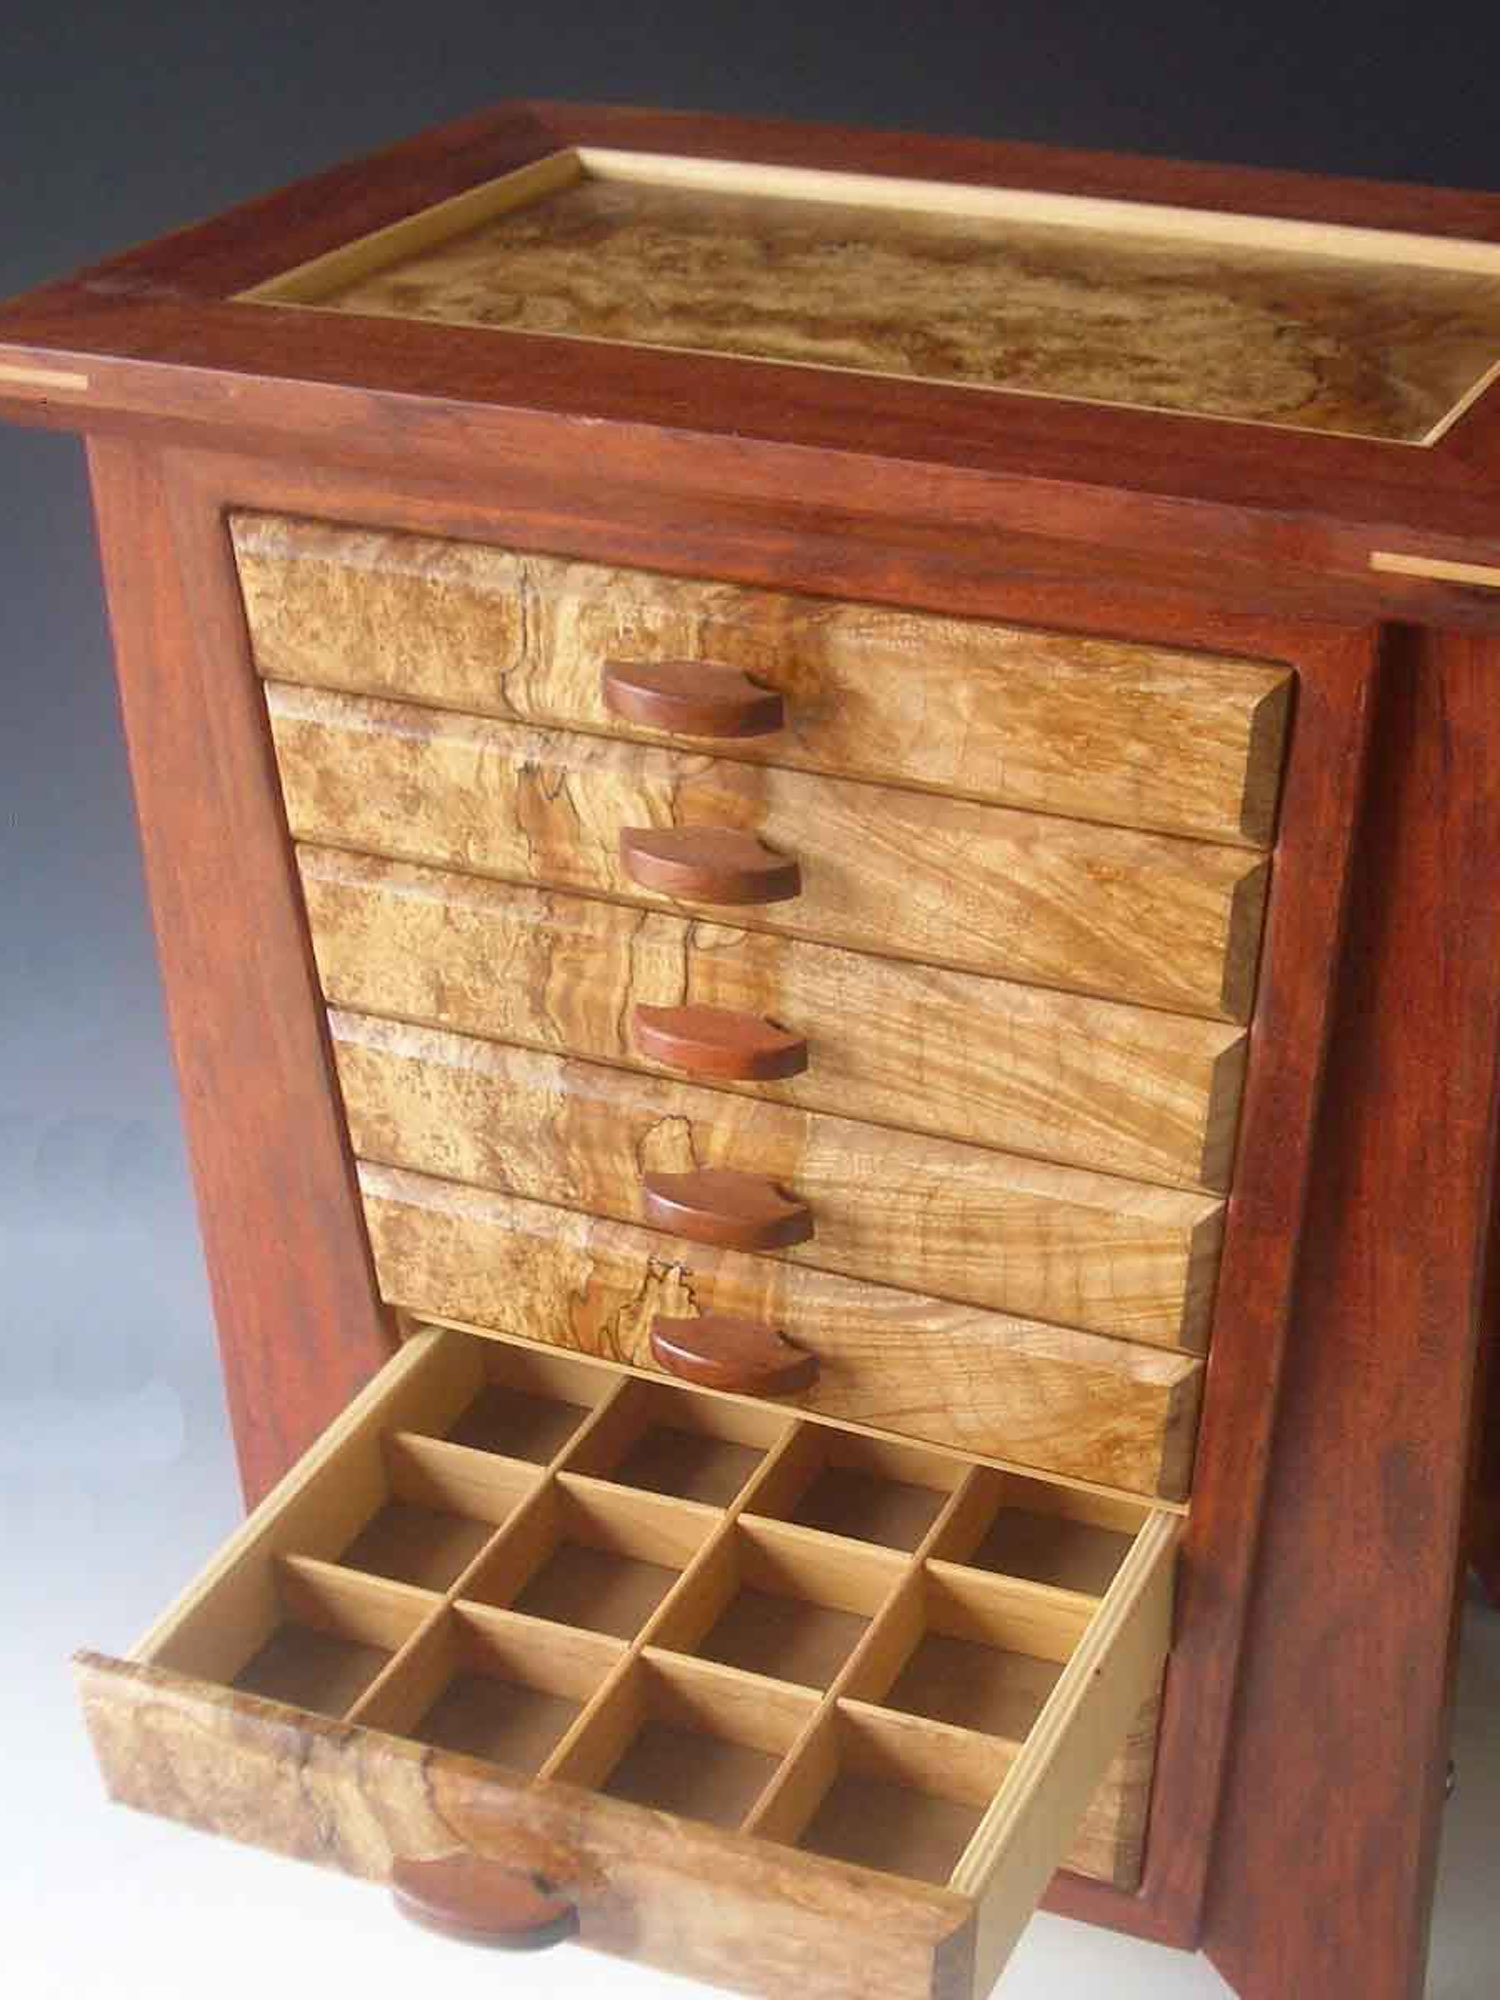 Handmade Jewelry Boxes: Unique Gifts for Women